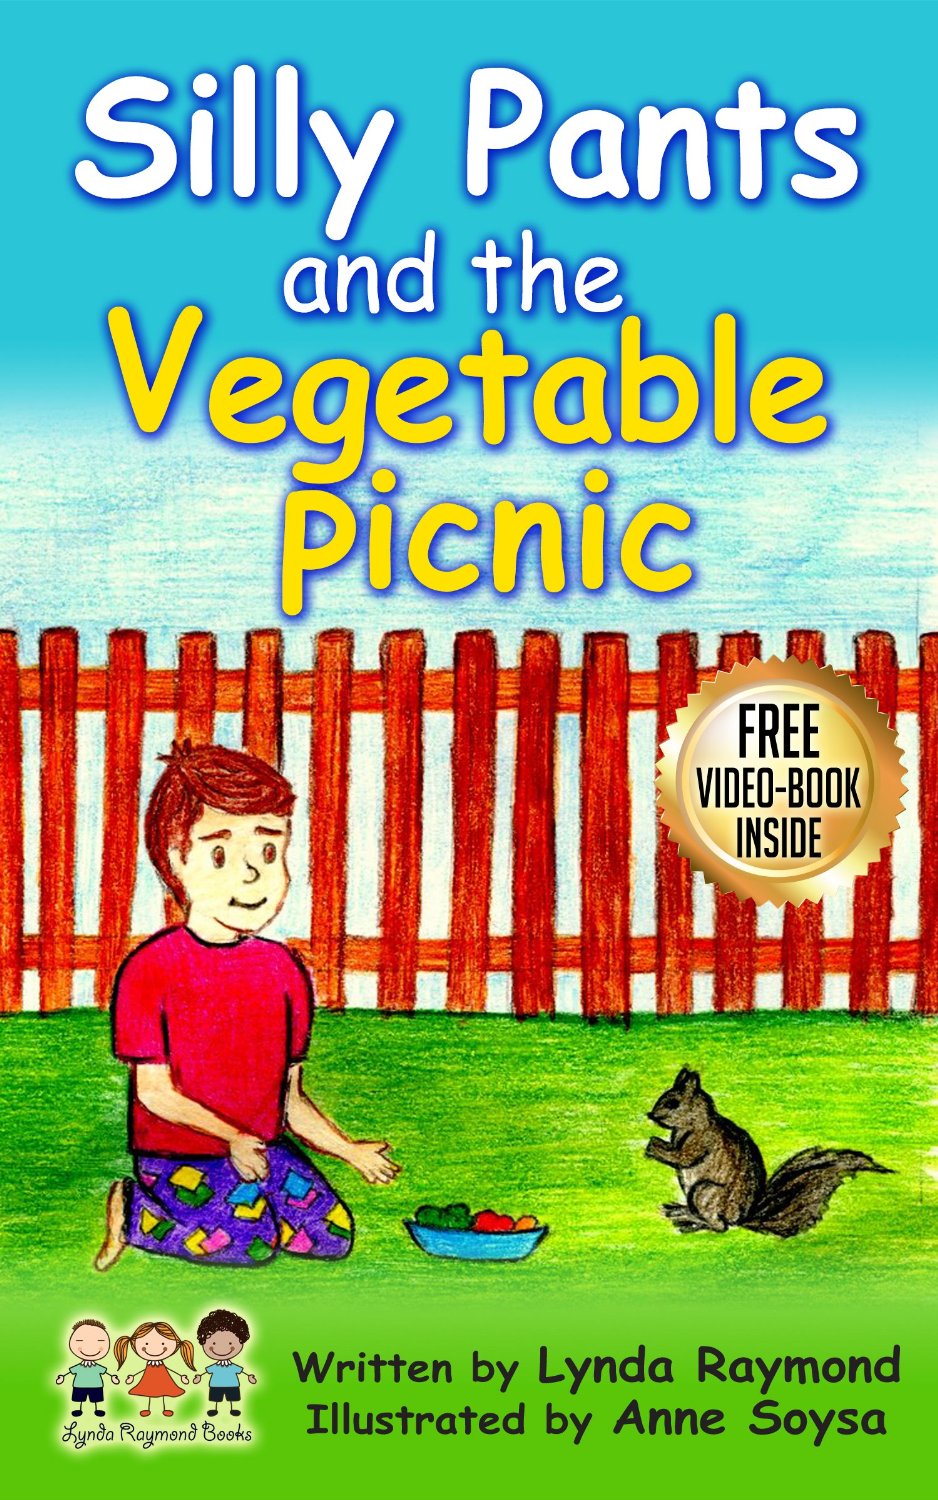 Silly Pants and the Vegetable Picnic by Brenda Maxfield